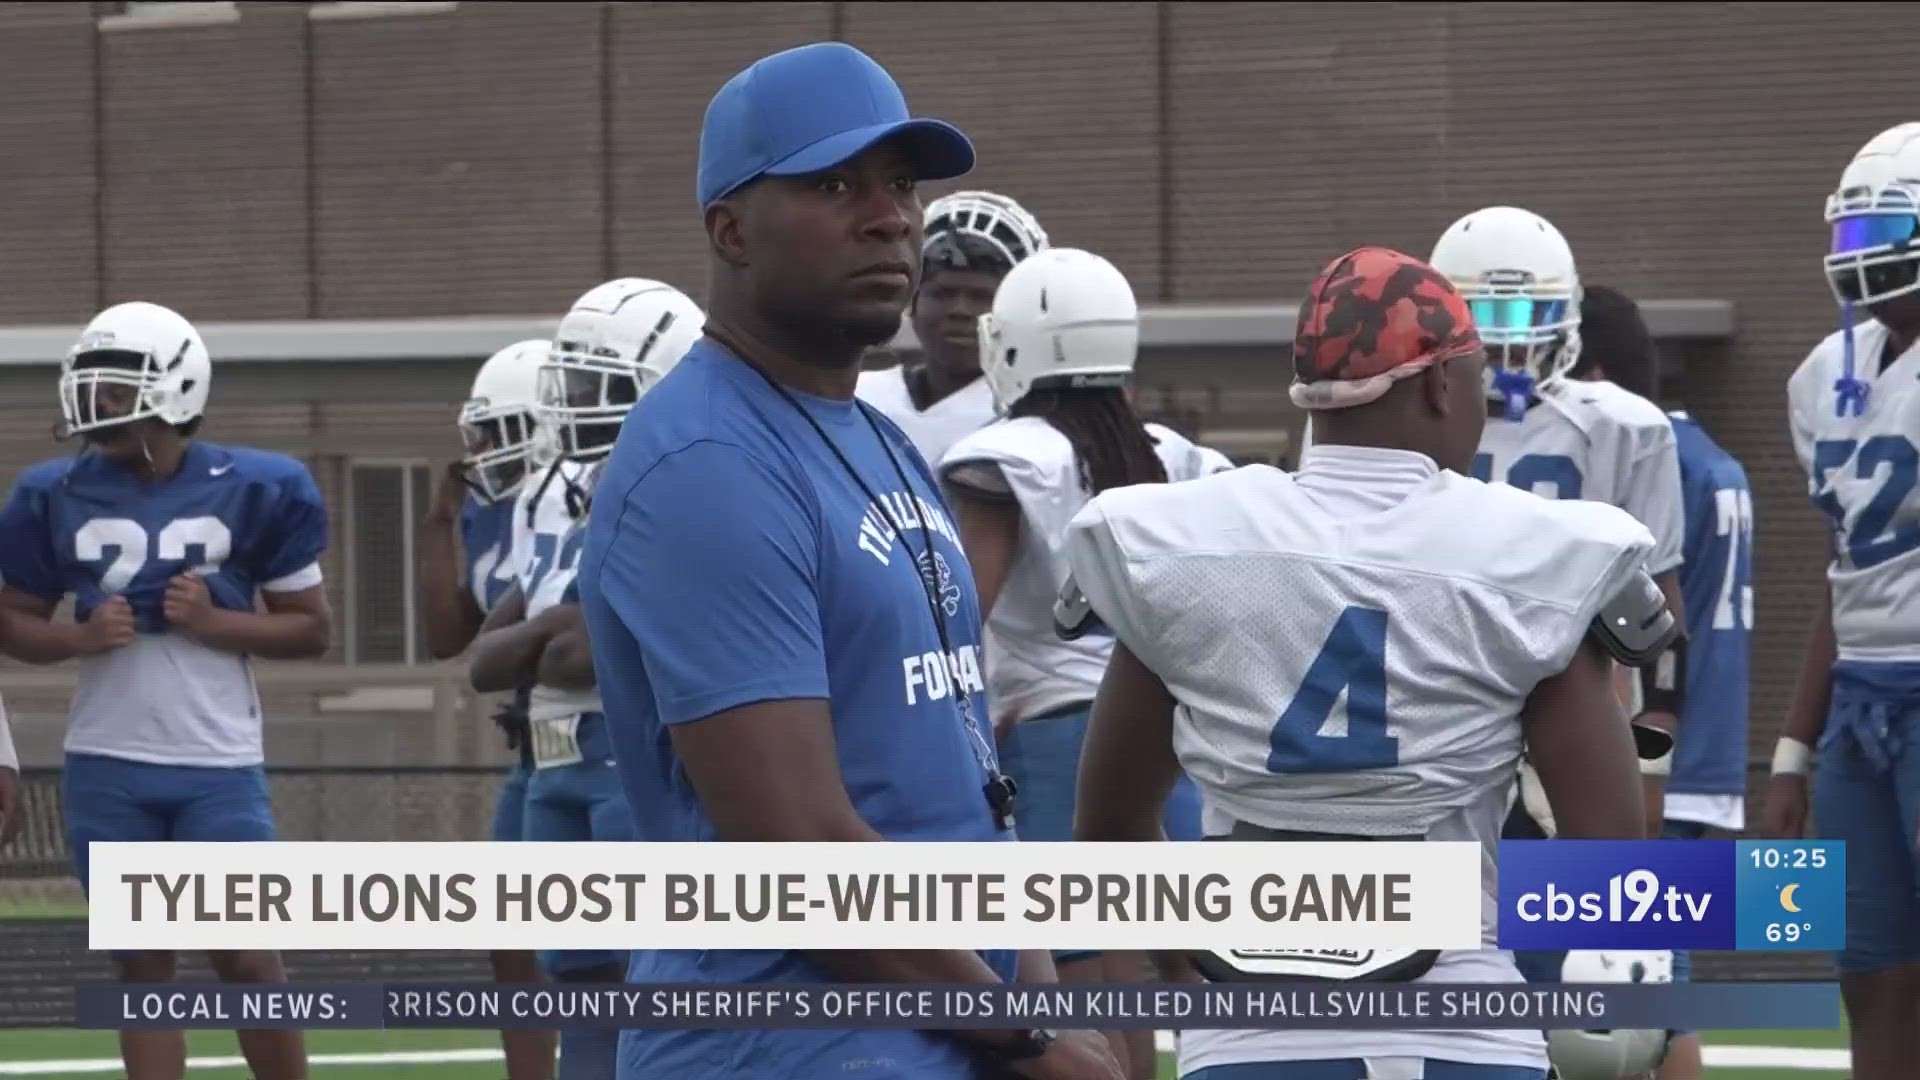 The Tyler high Lions host first spring game under new head coach, Rashaun Woods